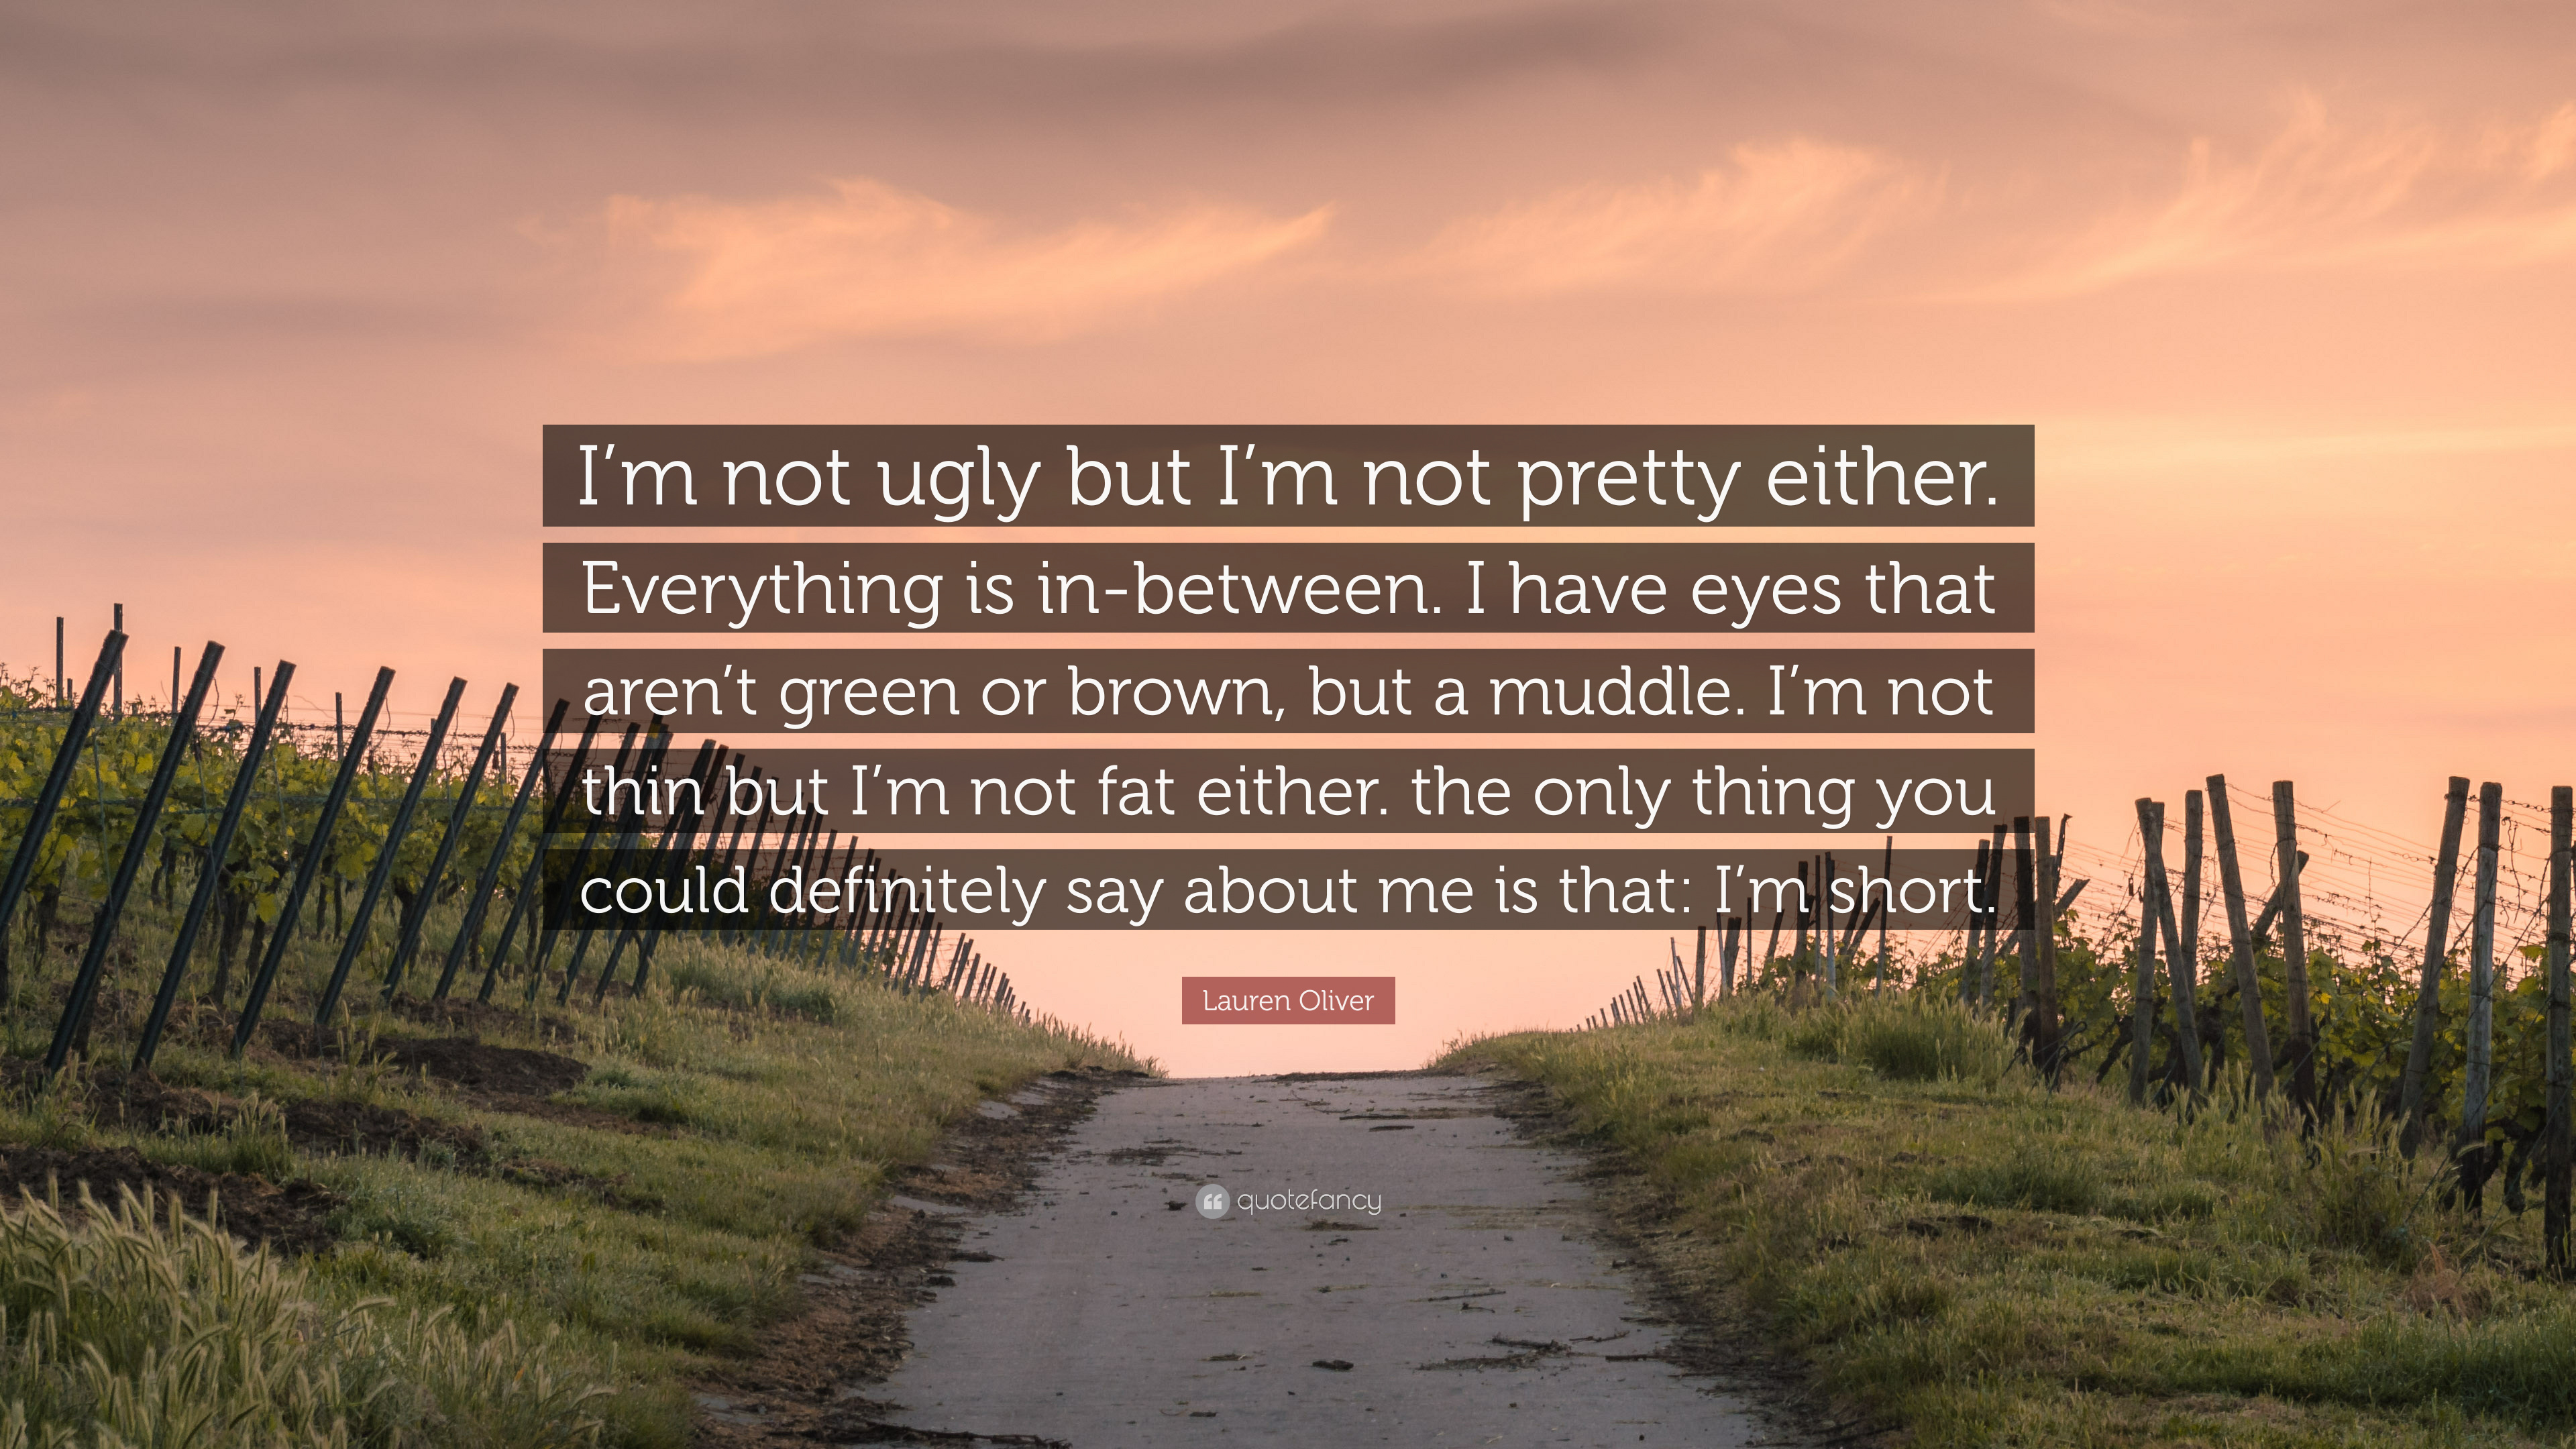 Lauren Oliver Quote: “I'm not ugly but I'm not pretty either